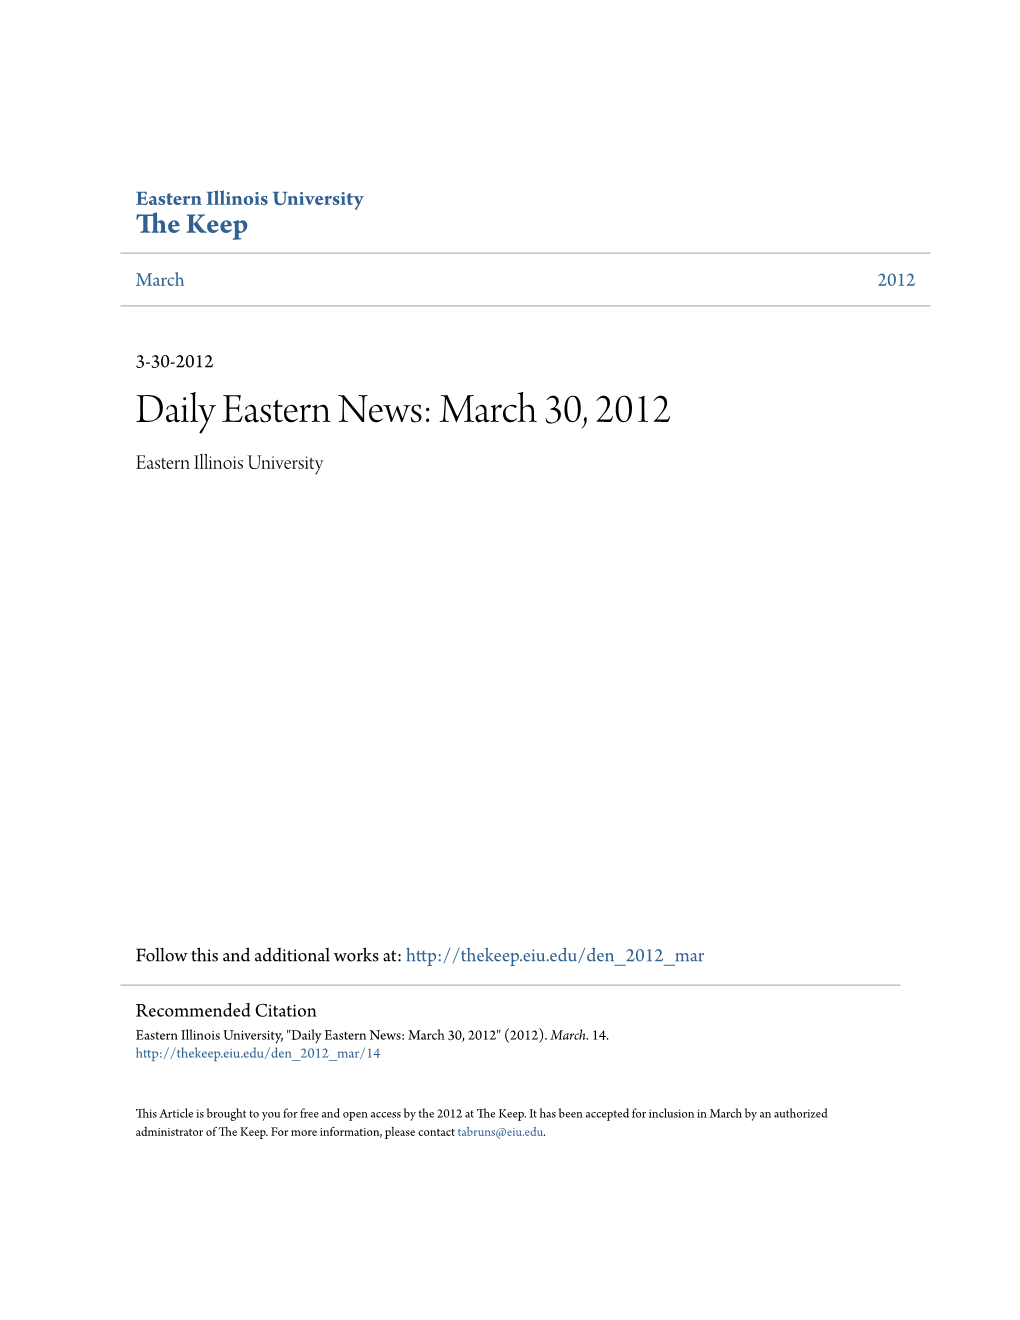 Daily Eastern News: March 30, 2012 Eastern Illinois University